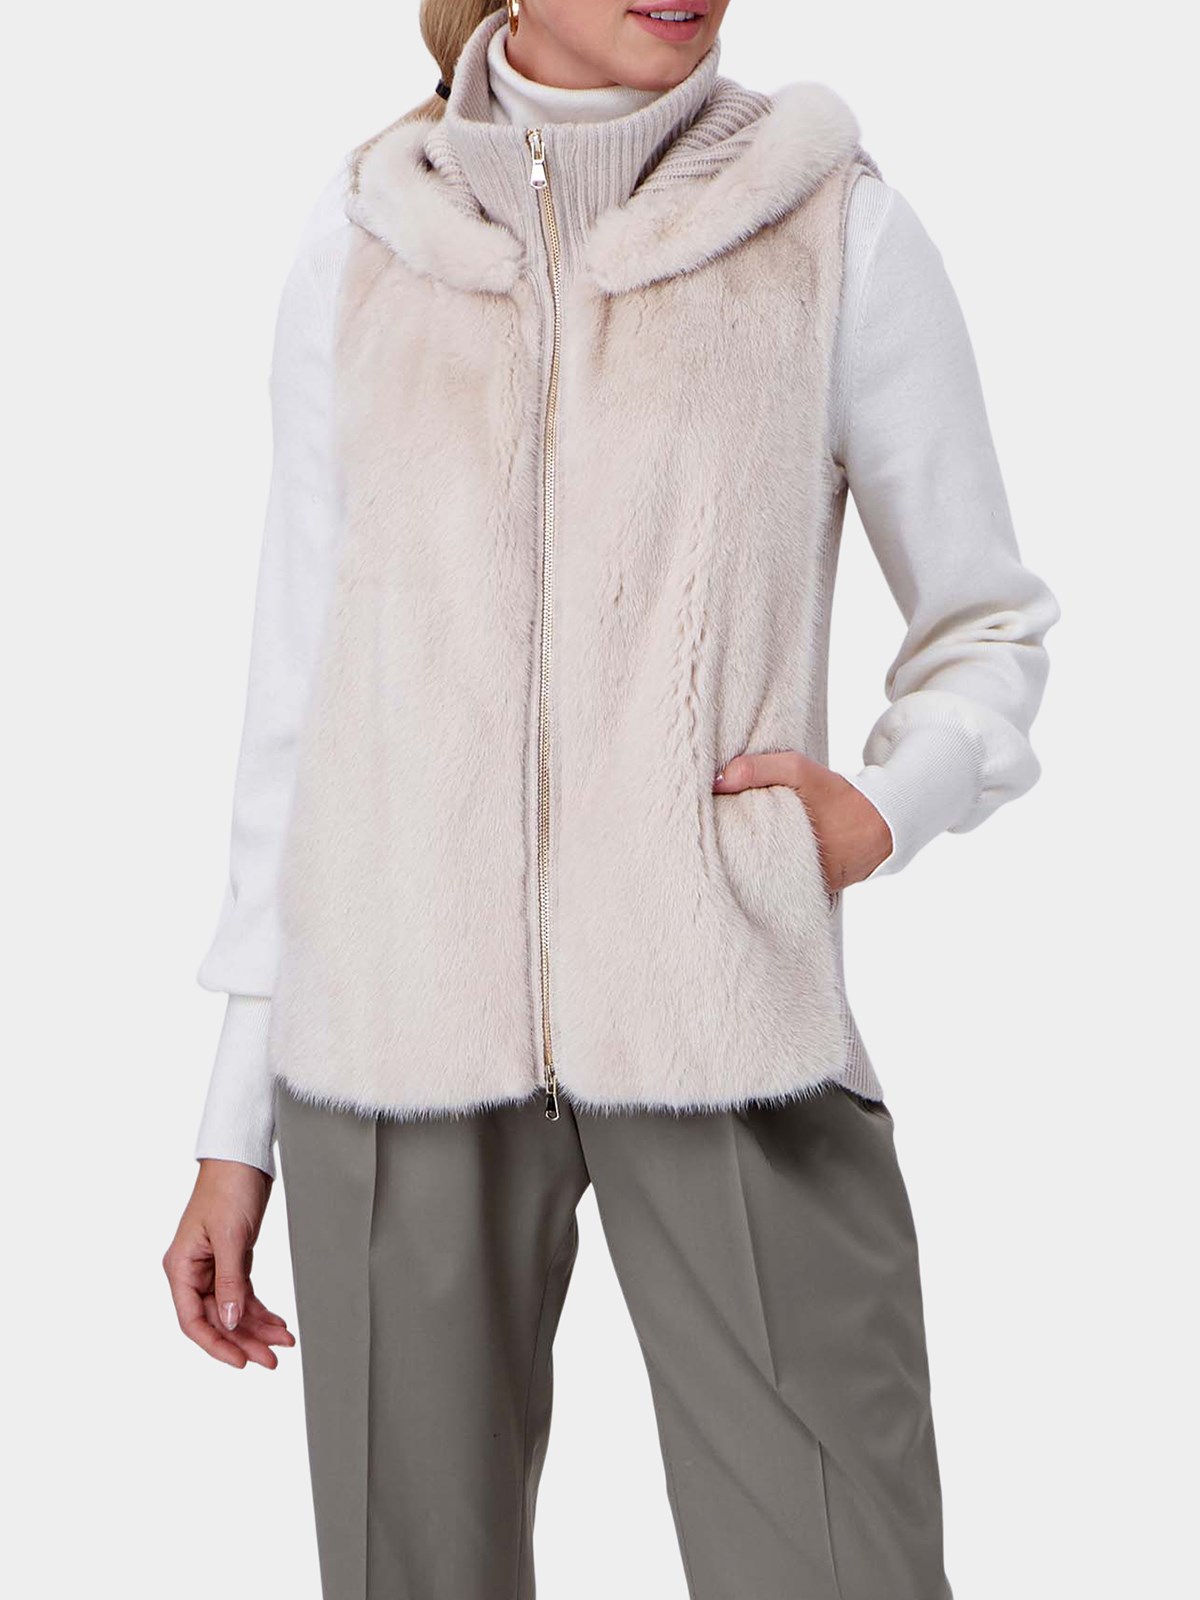 Woman's Blush Hooded Mink Fur Vest with Wool/Cashmere Blend Trim and Back